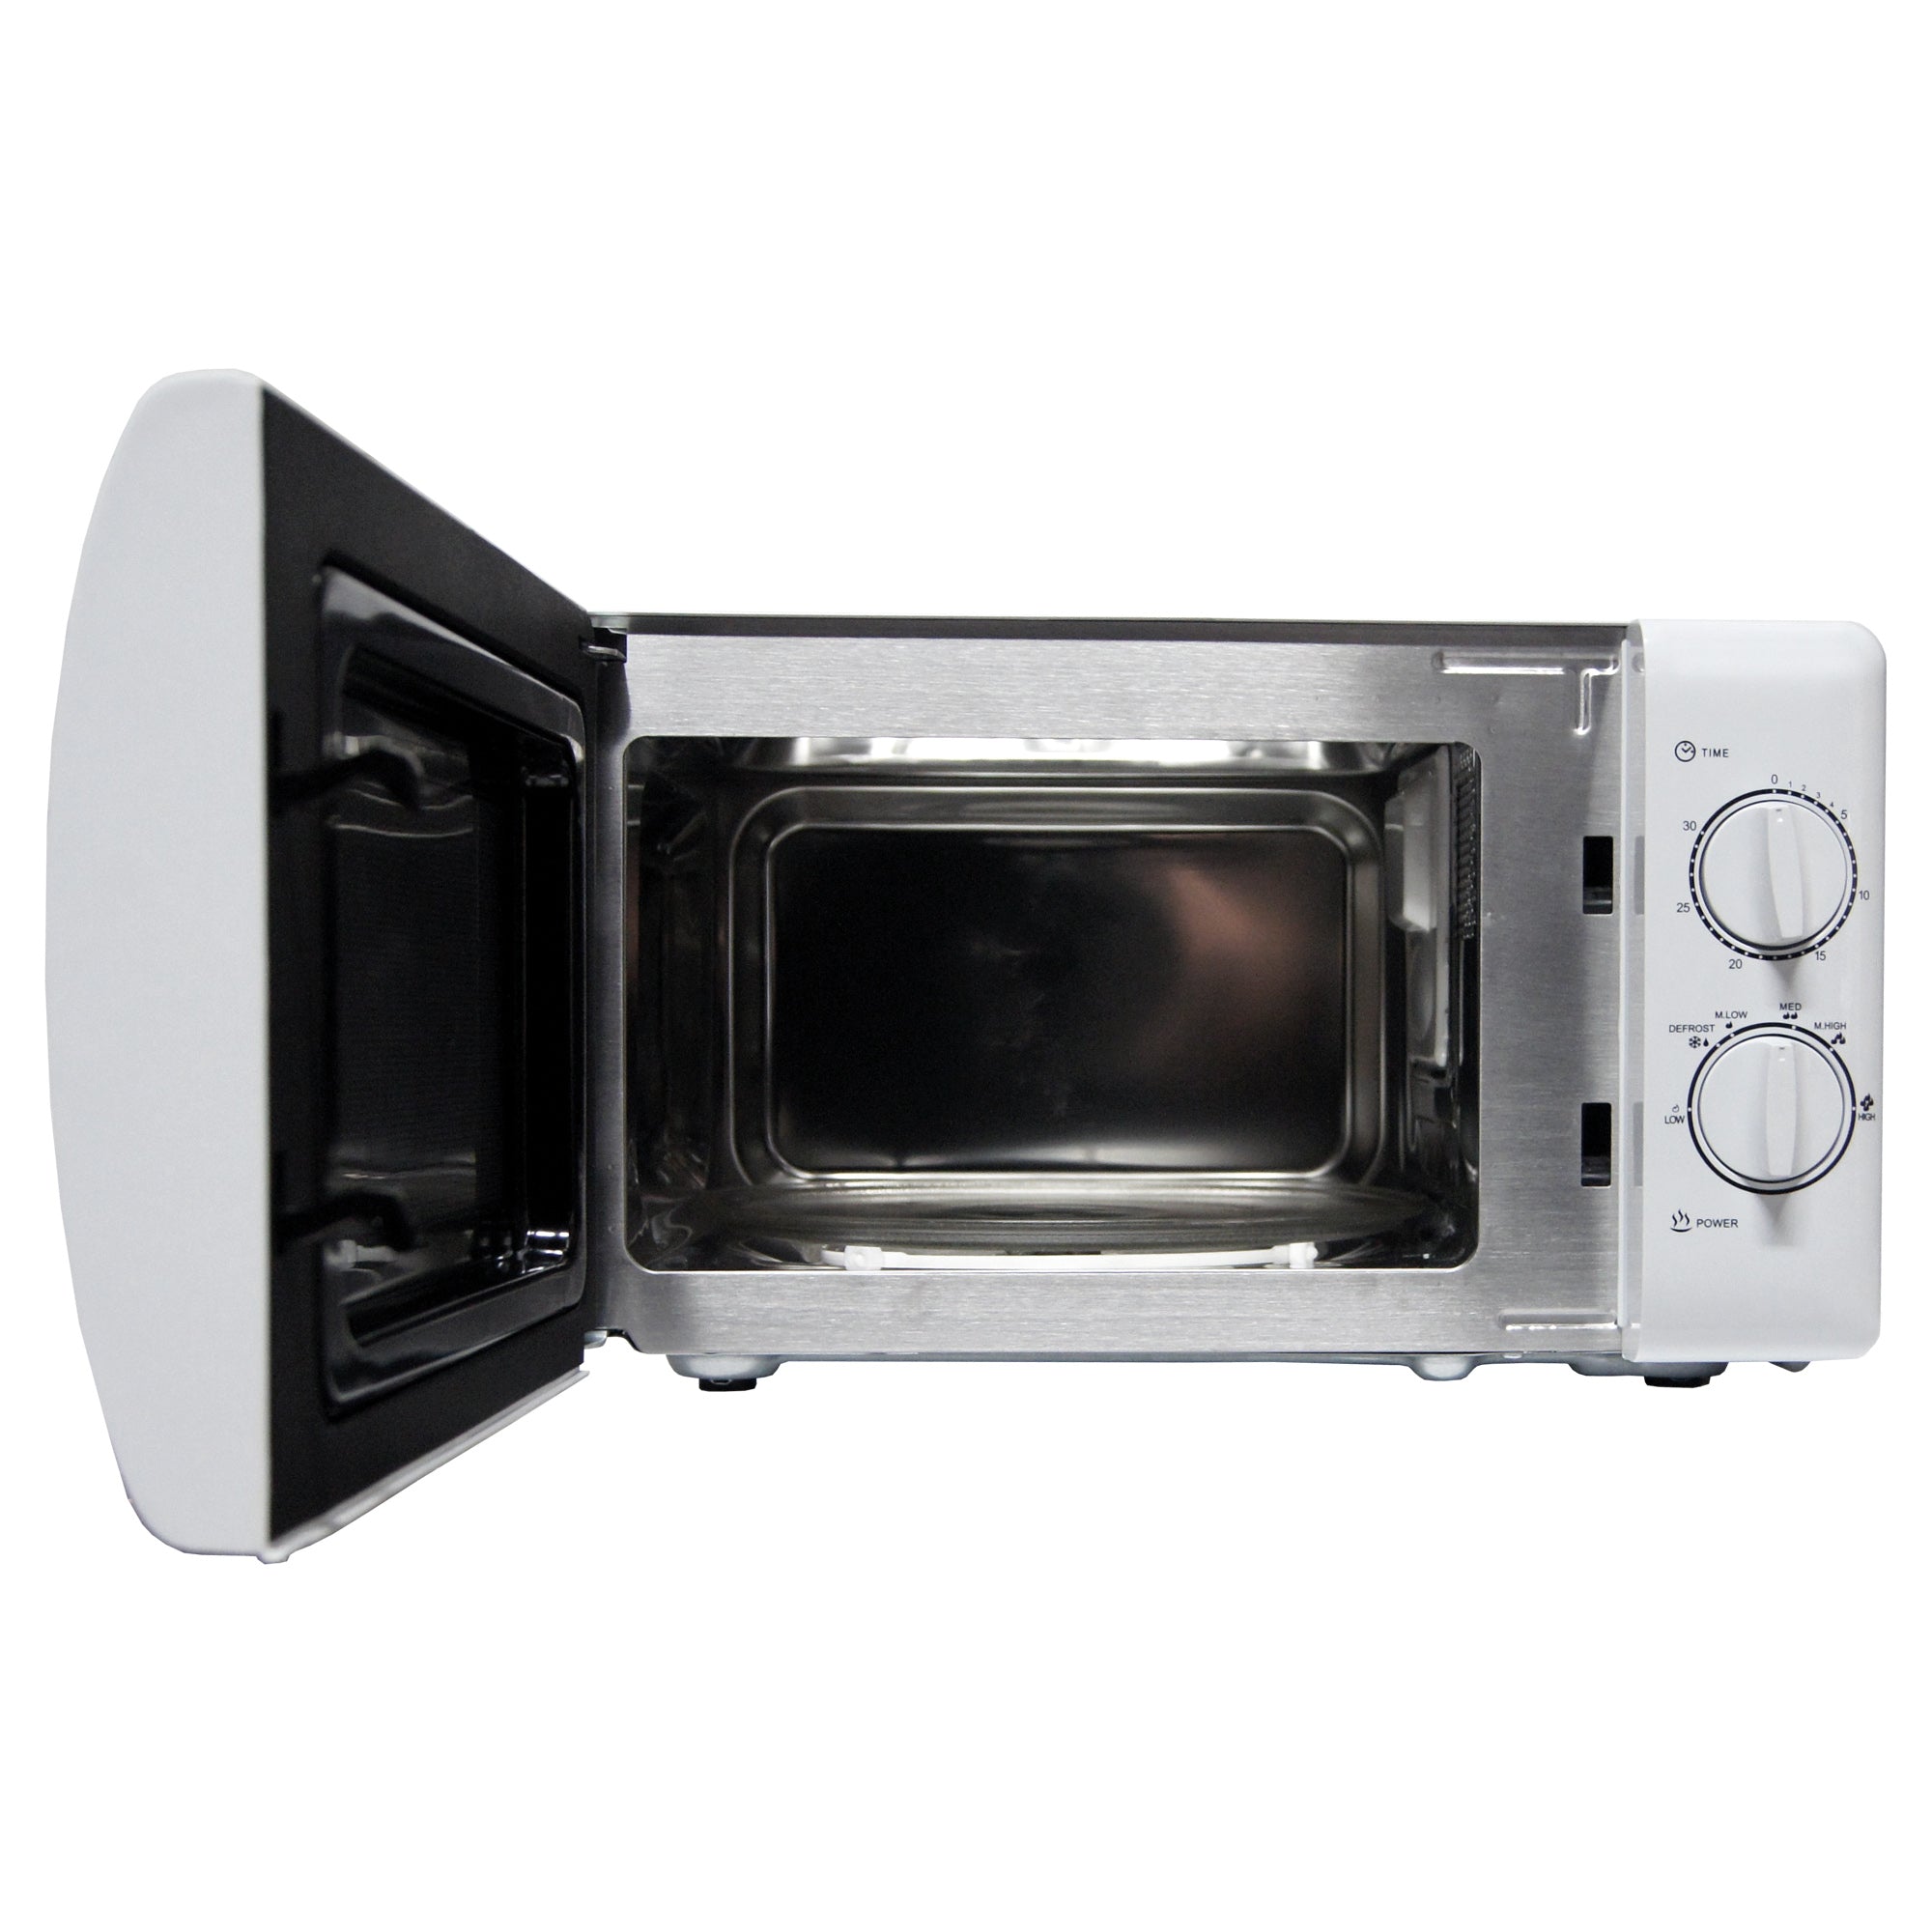 Manual Microwave, 20 Litre, Easy Clean Interior, 700W, White